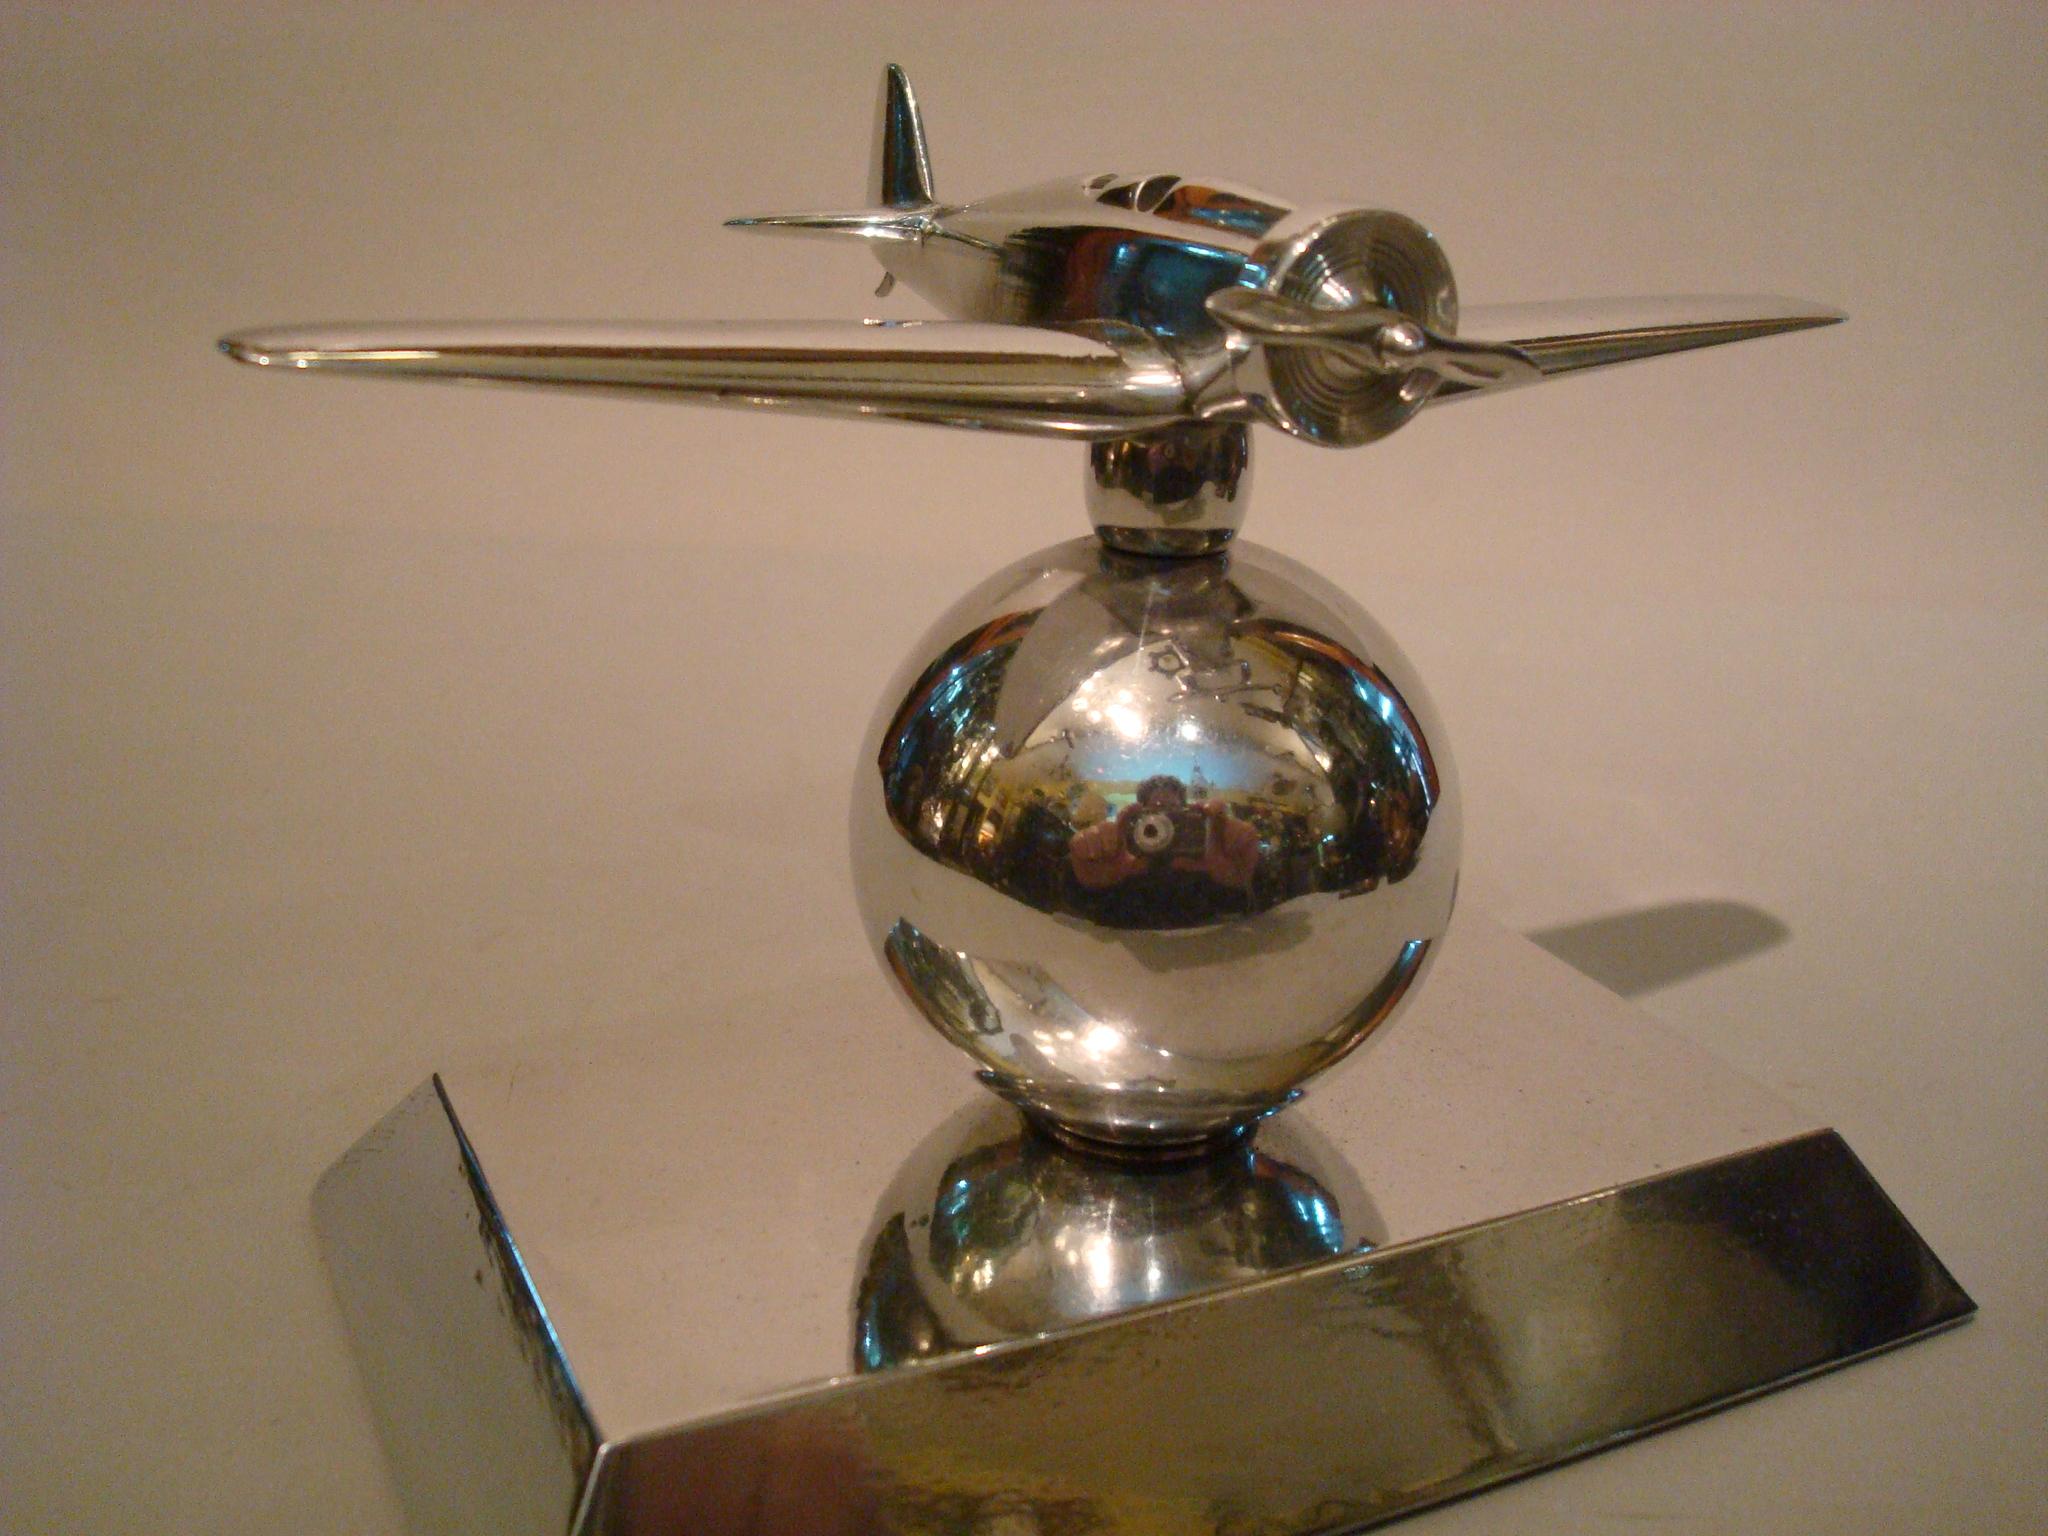 Art Deco / mid-20 century airplane fighter over the world paperweight, 1930s
aluminium Art Deco / streamlined aviation paperweight. Lovely desk size. A perfect gift.